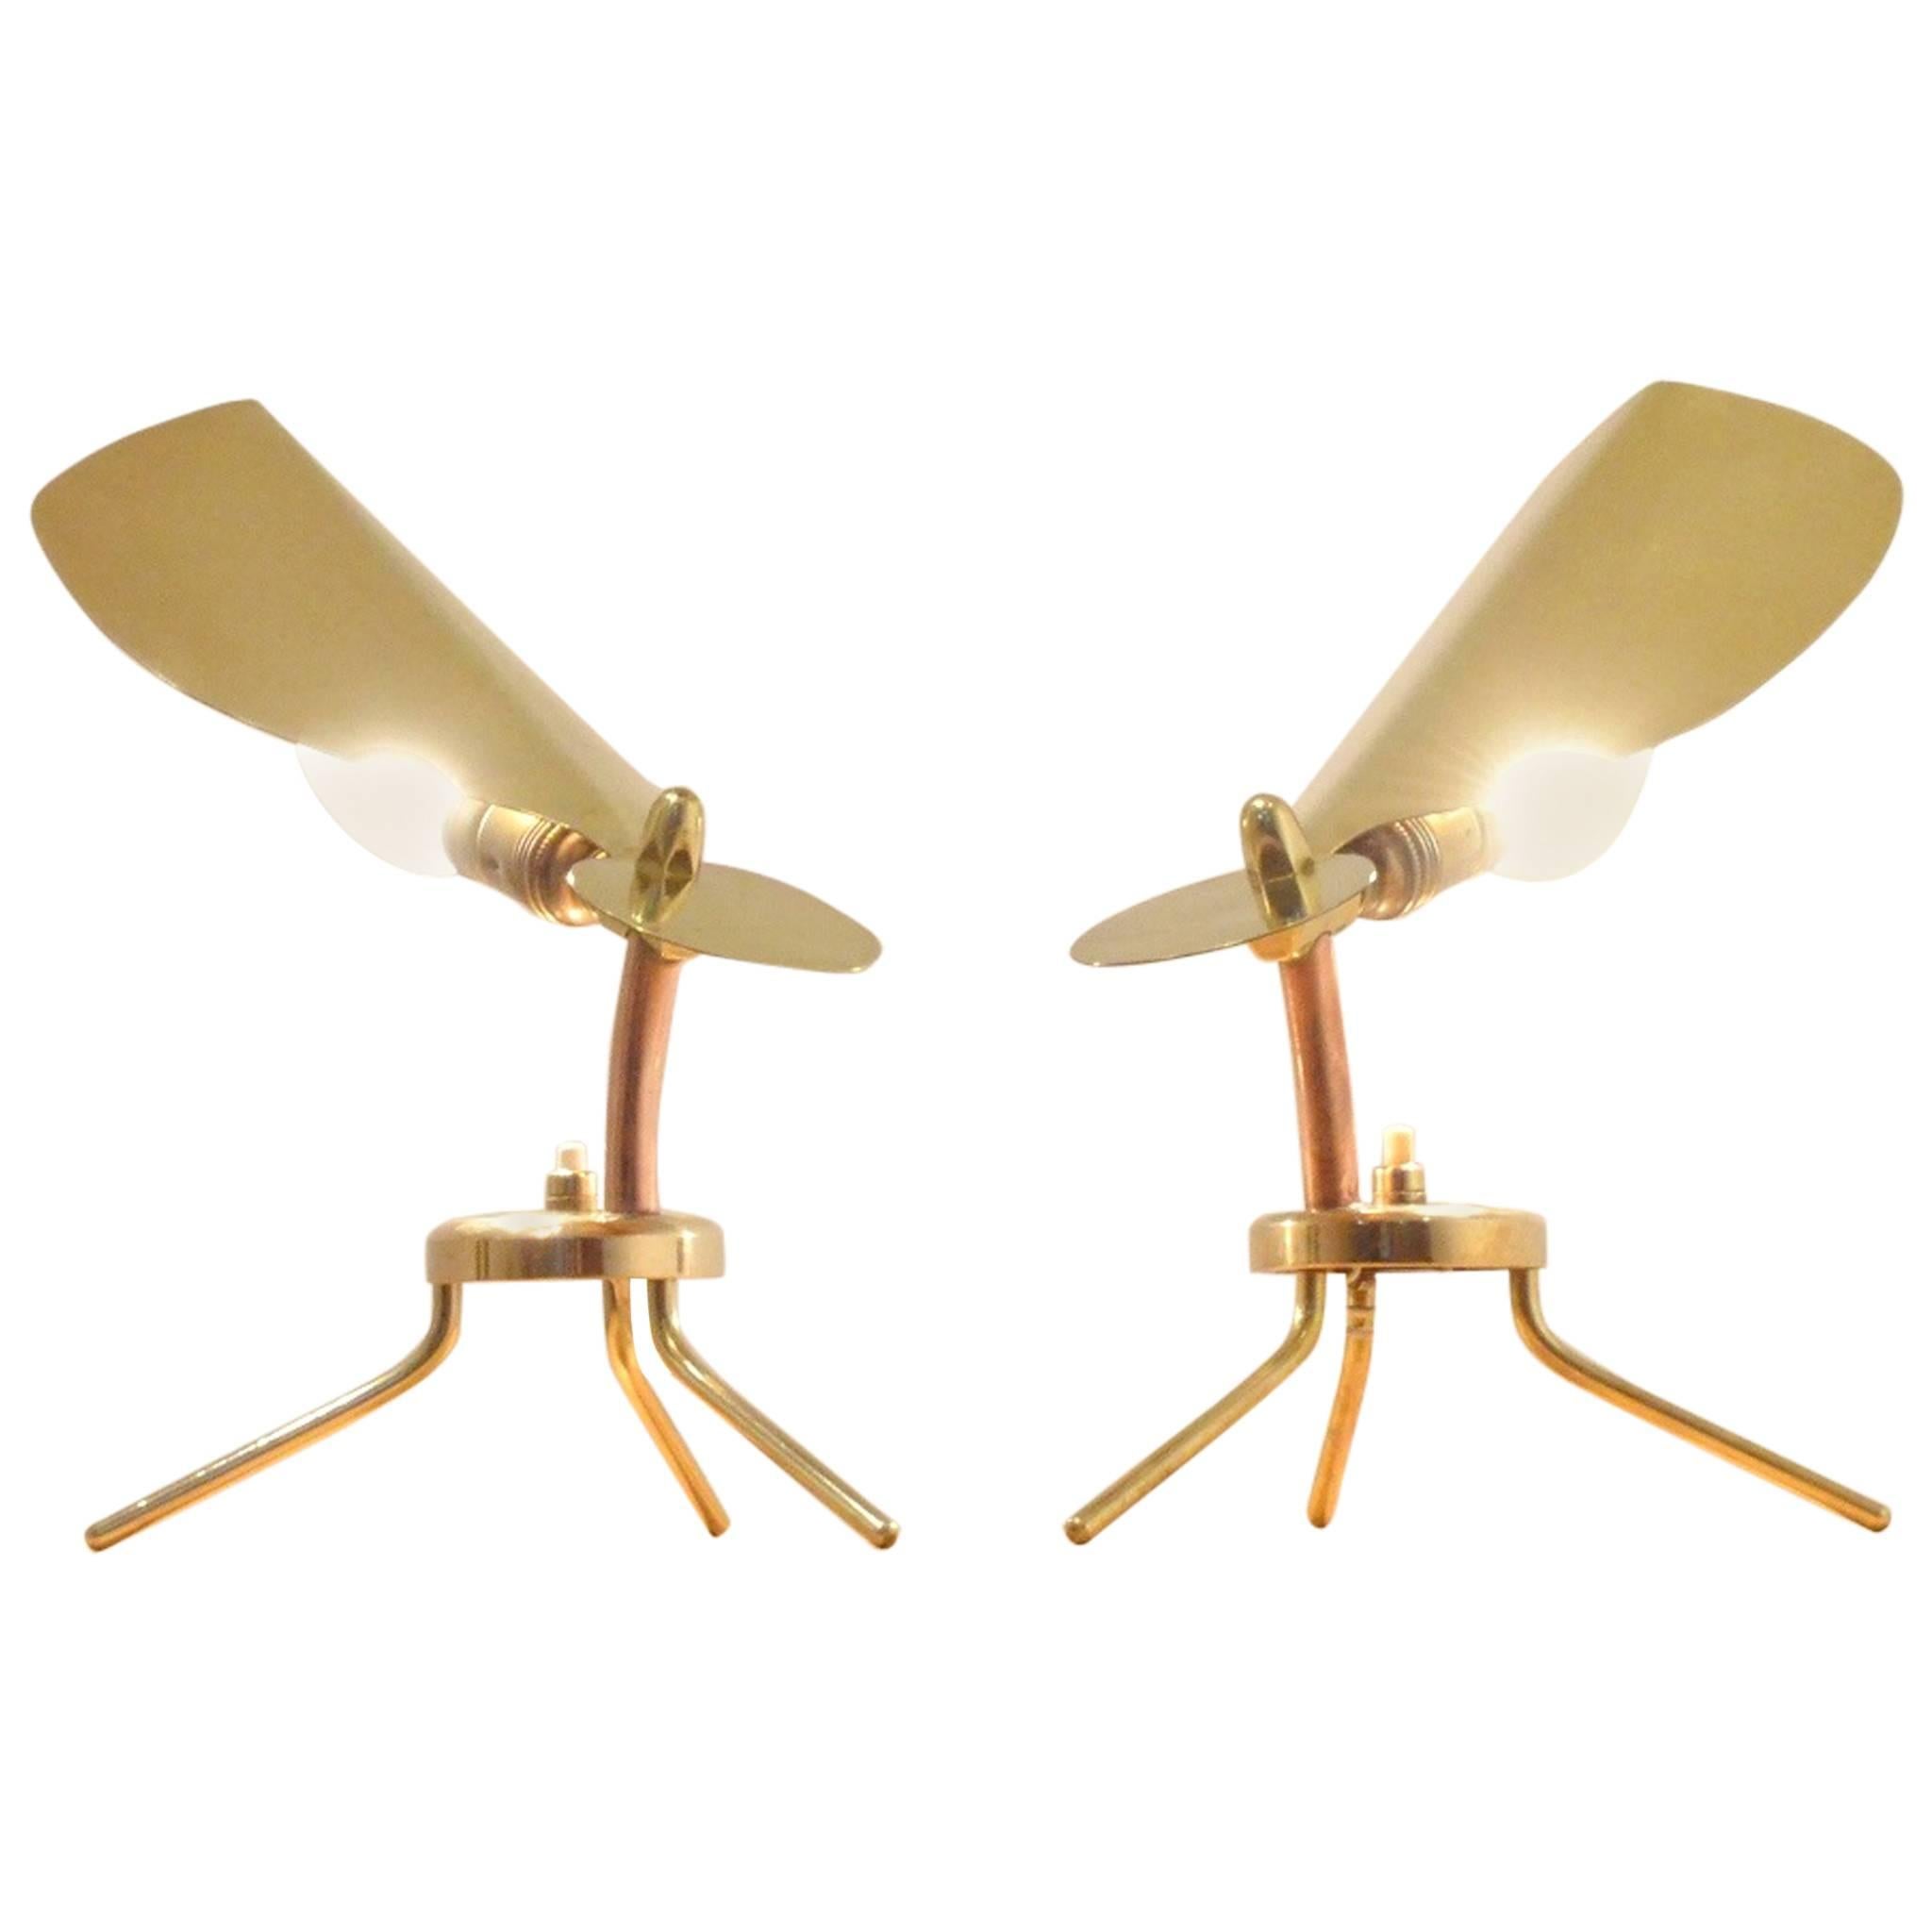 Pair of Mid-Century Modern Italian Zoomorphic Table Lamps in Brass & Copper